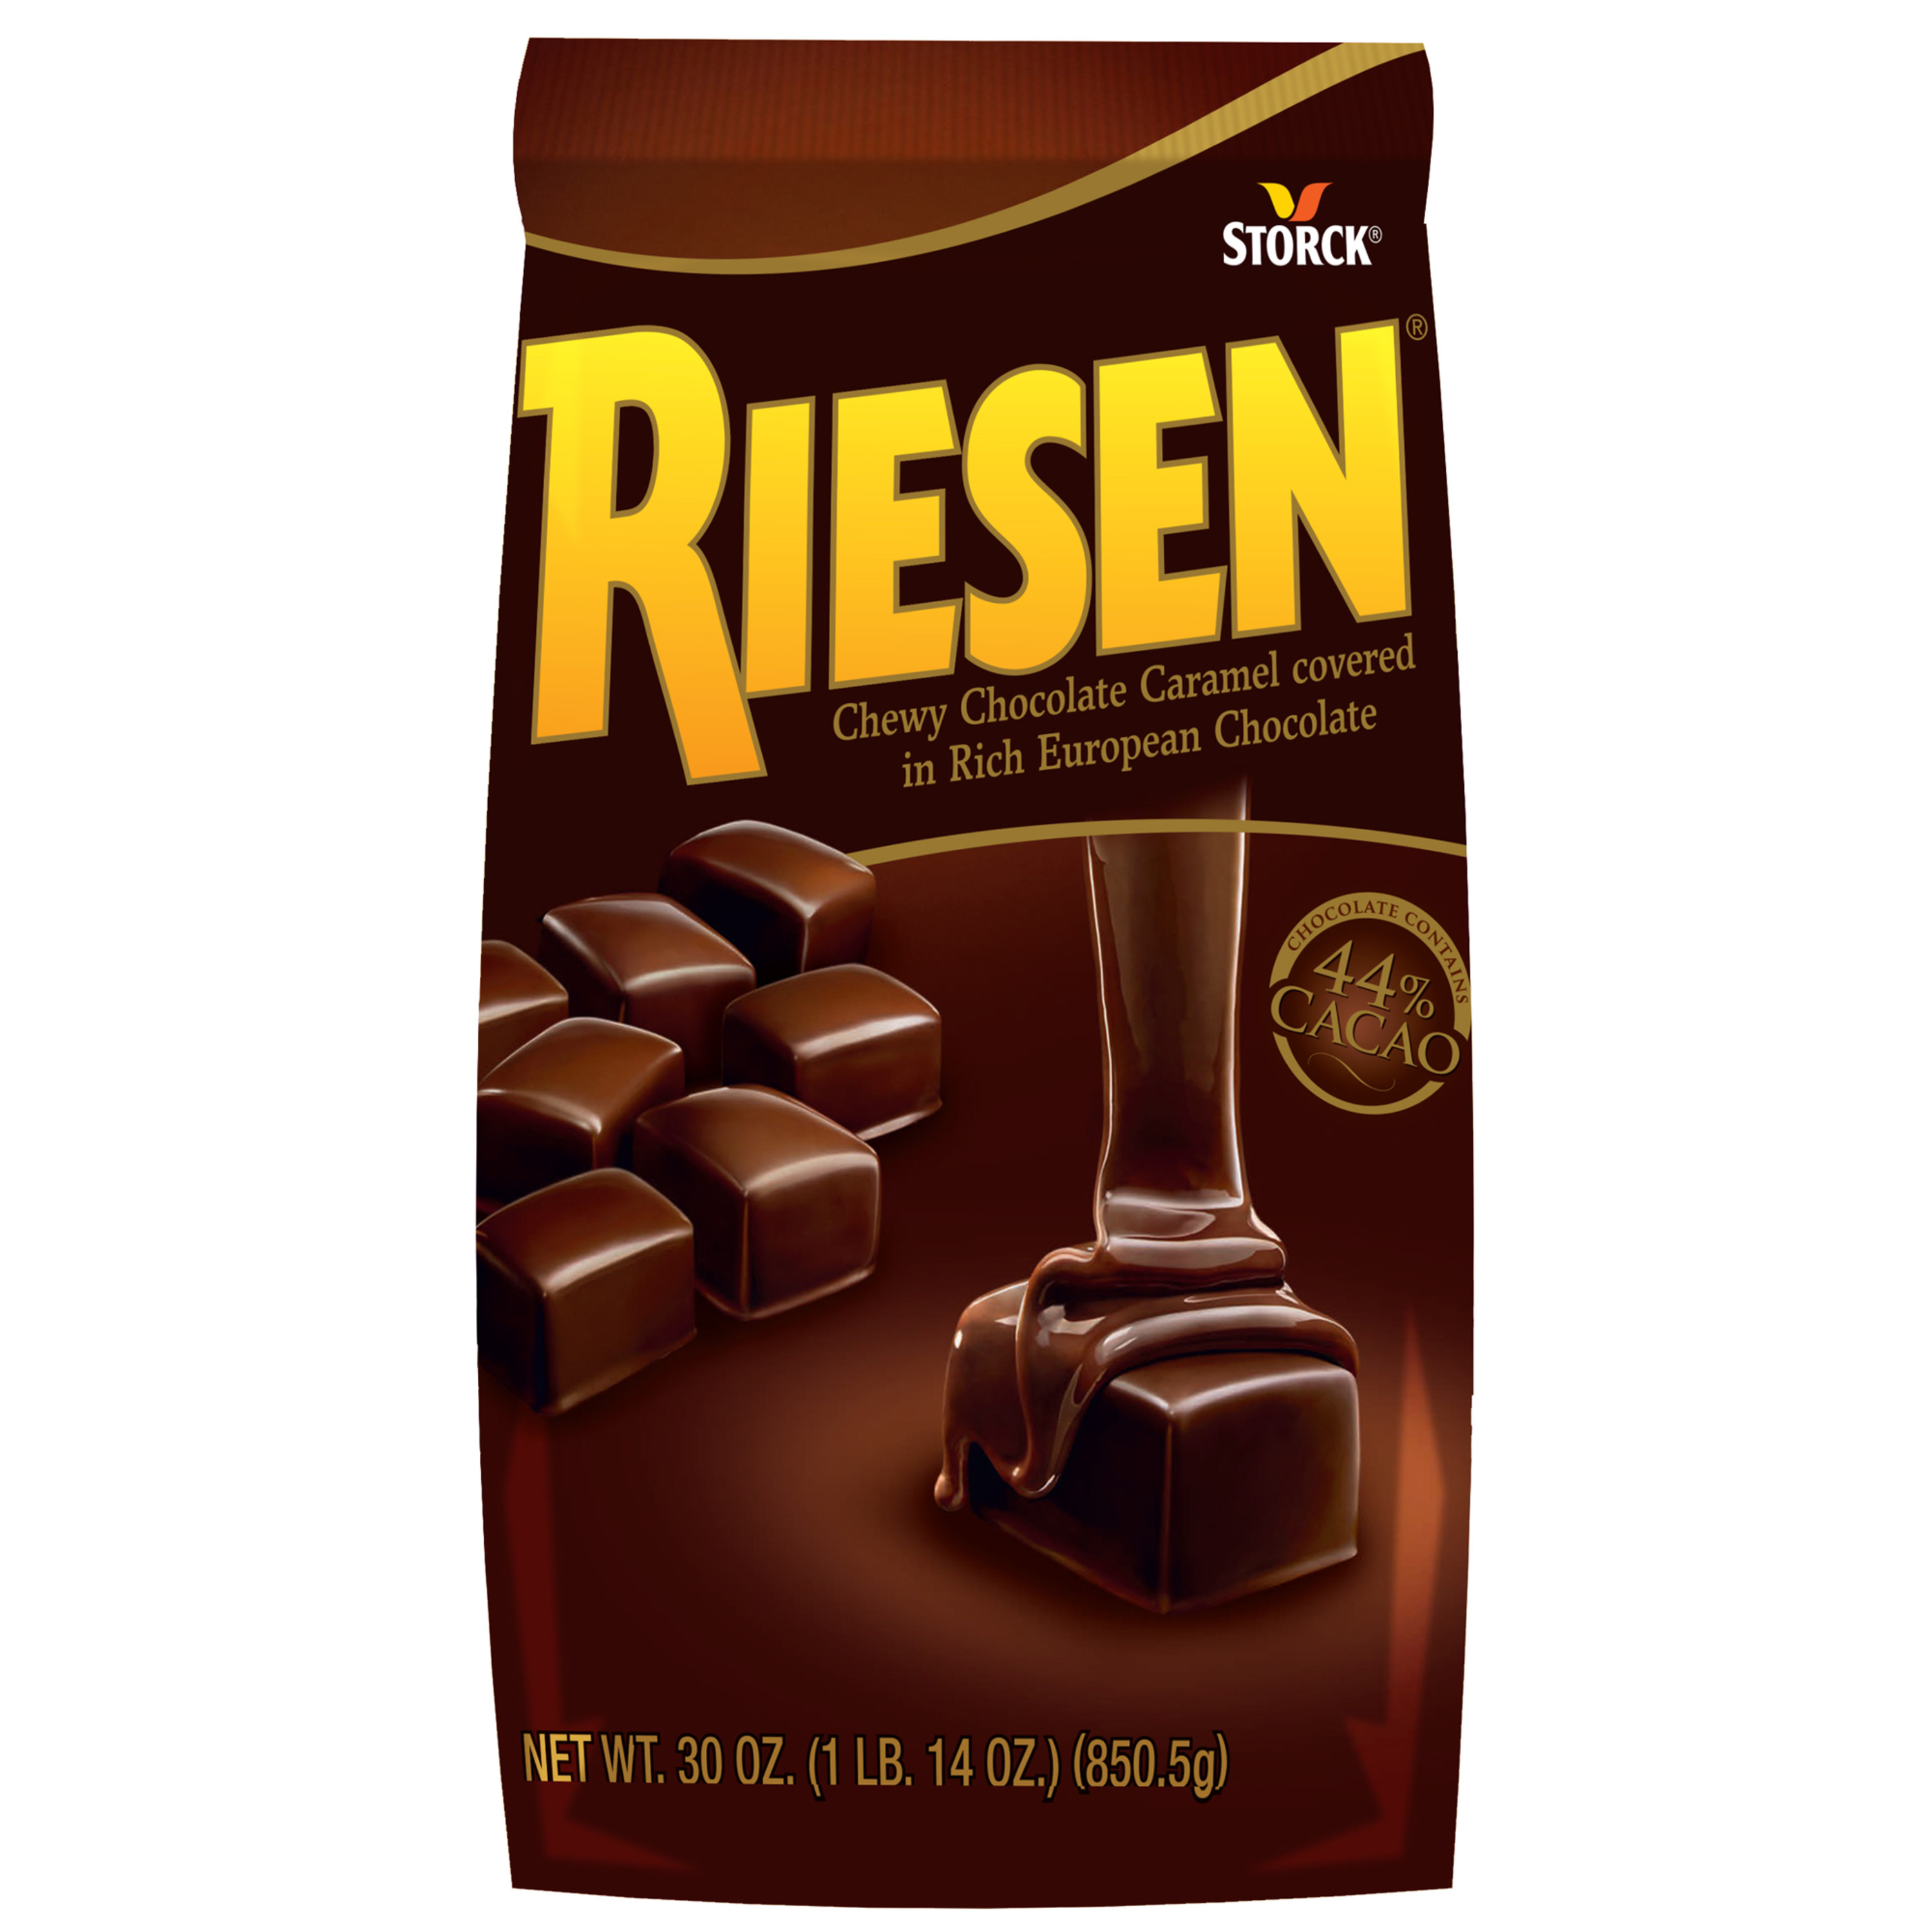 RIESEN Chewy Chocolate Covered Caramel Candy, 30 oz - image 2 of 7